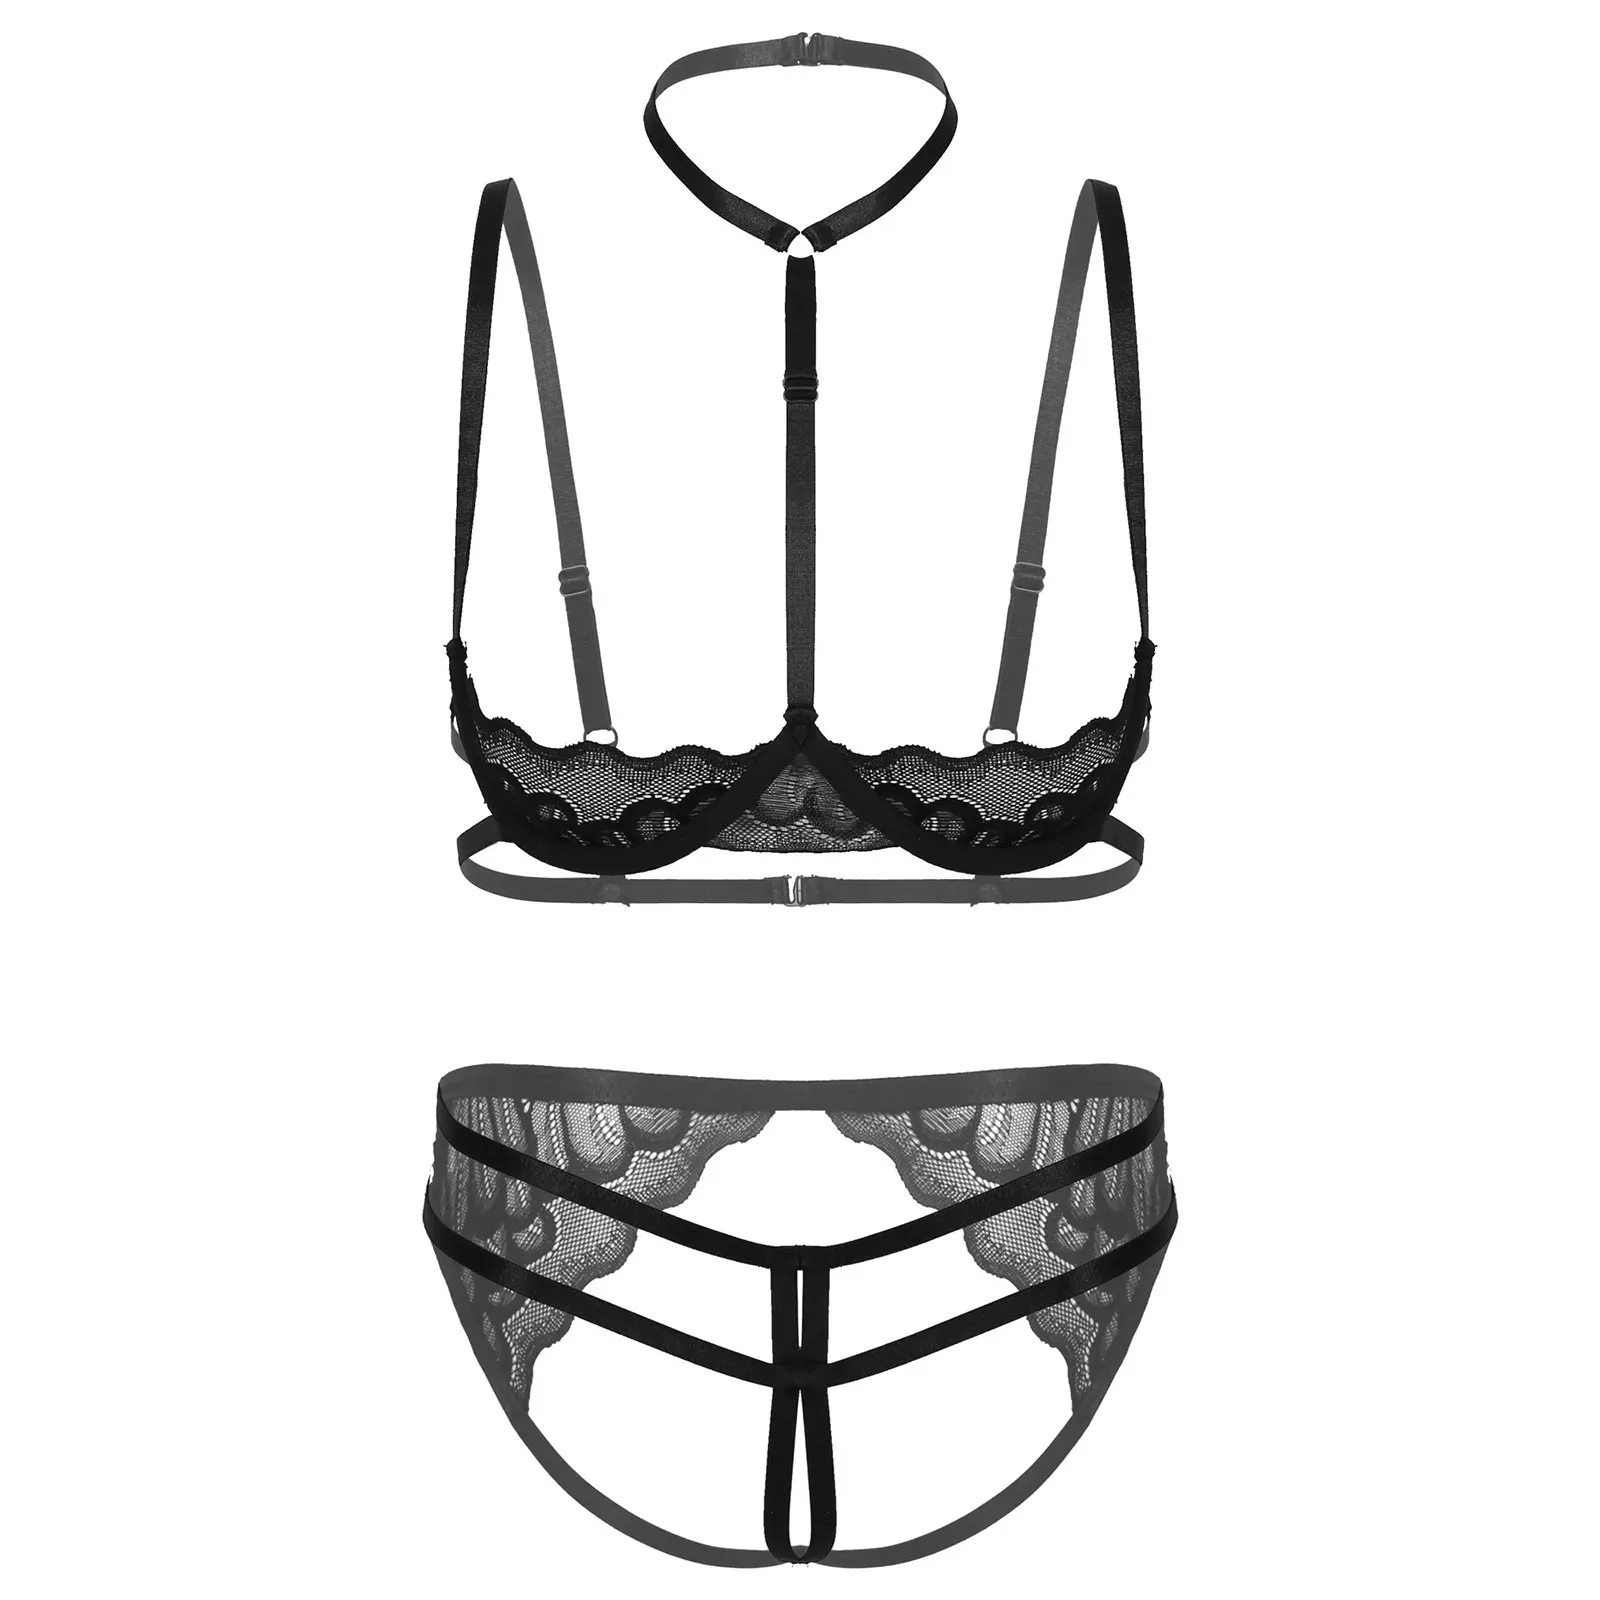 

Womens Sheer Lace Erotic Lingerie Suit Underwear Sleepwear Halter Neck Underwired Hot Bra Tops with Crotchless G-string Briefs